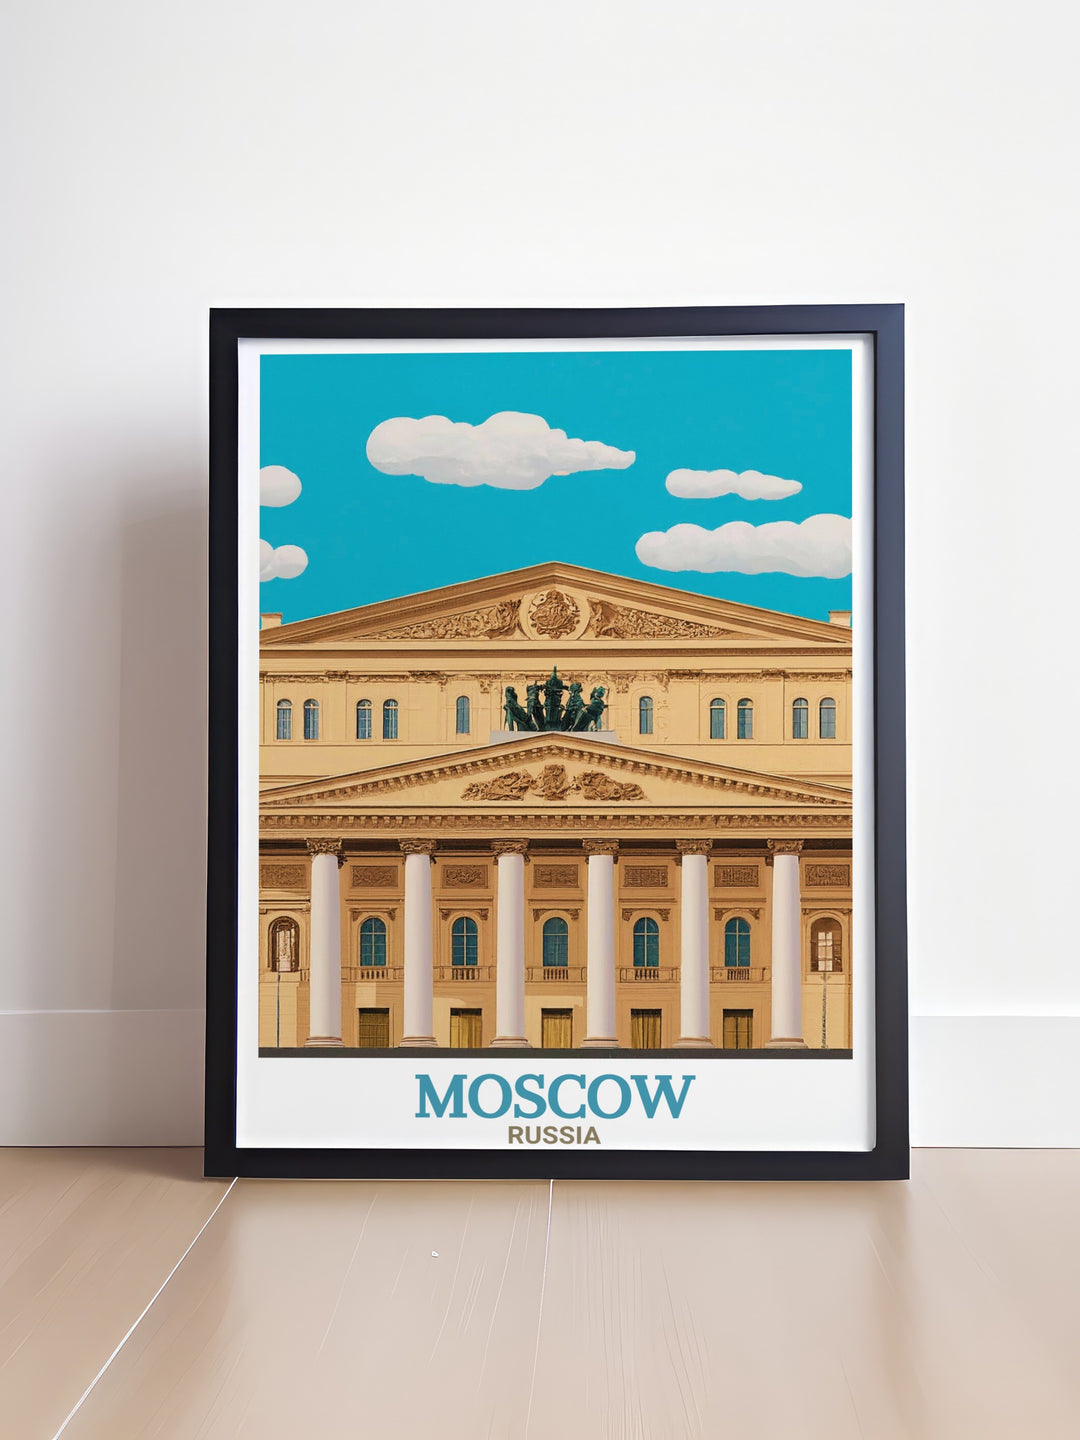 Bolshoi Theatre vintage print capturing the elegance and historic significance of one of Moscows most renowned cultural landmarks perfect for home decor and as a Russia gift for special occasions.